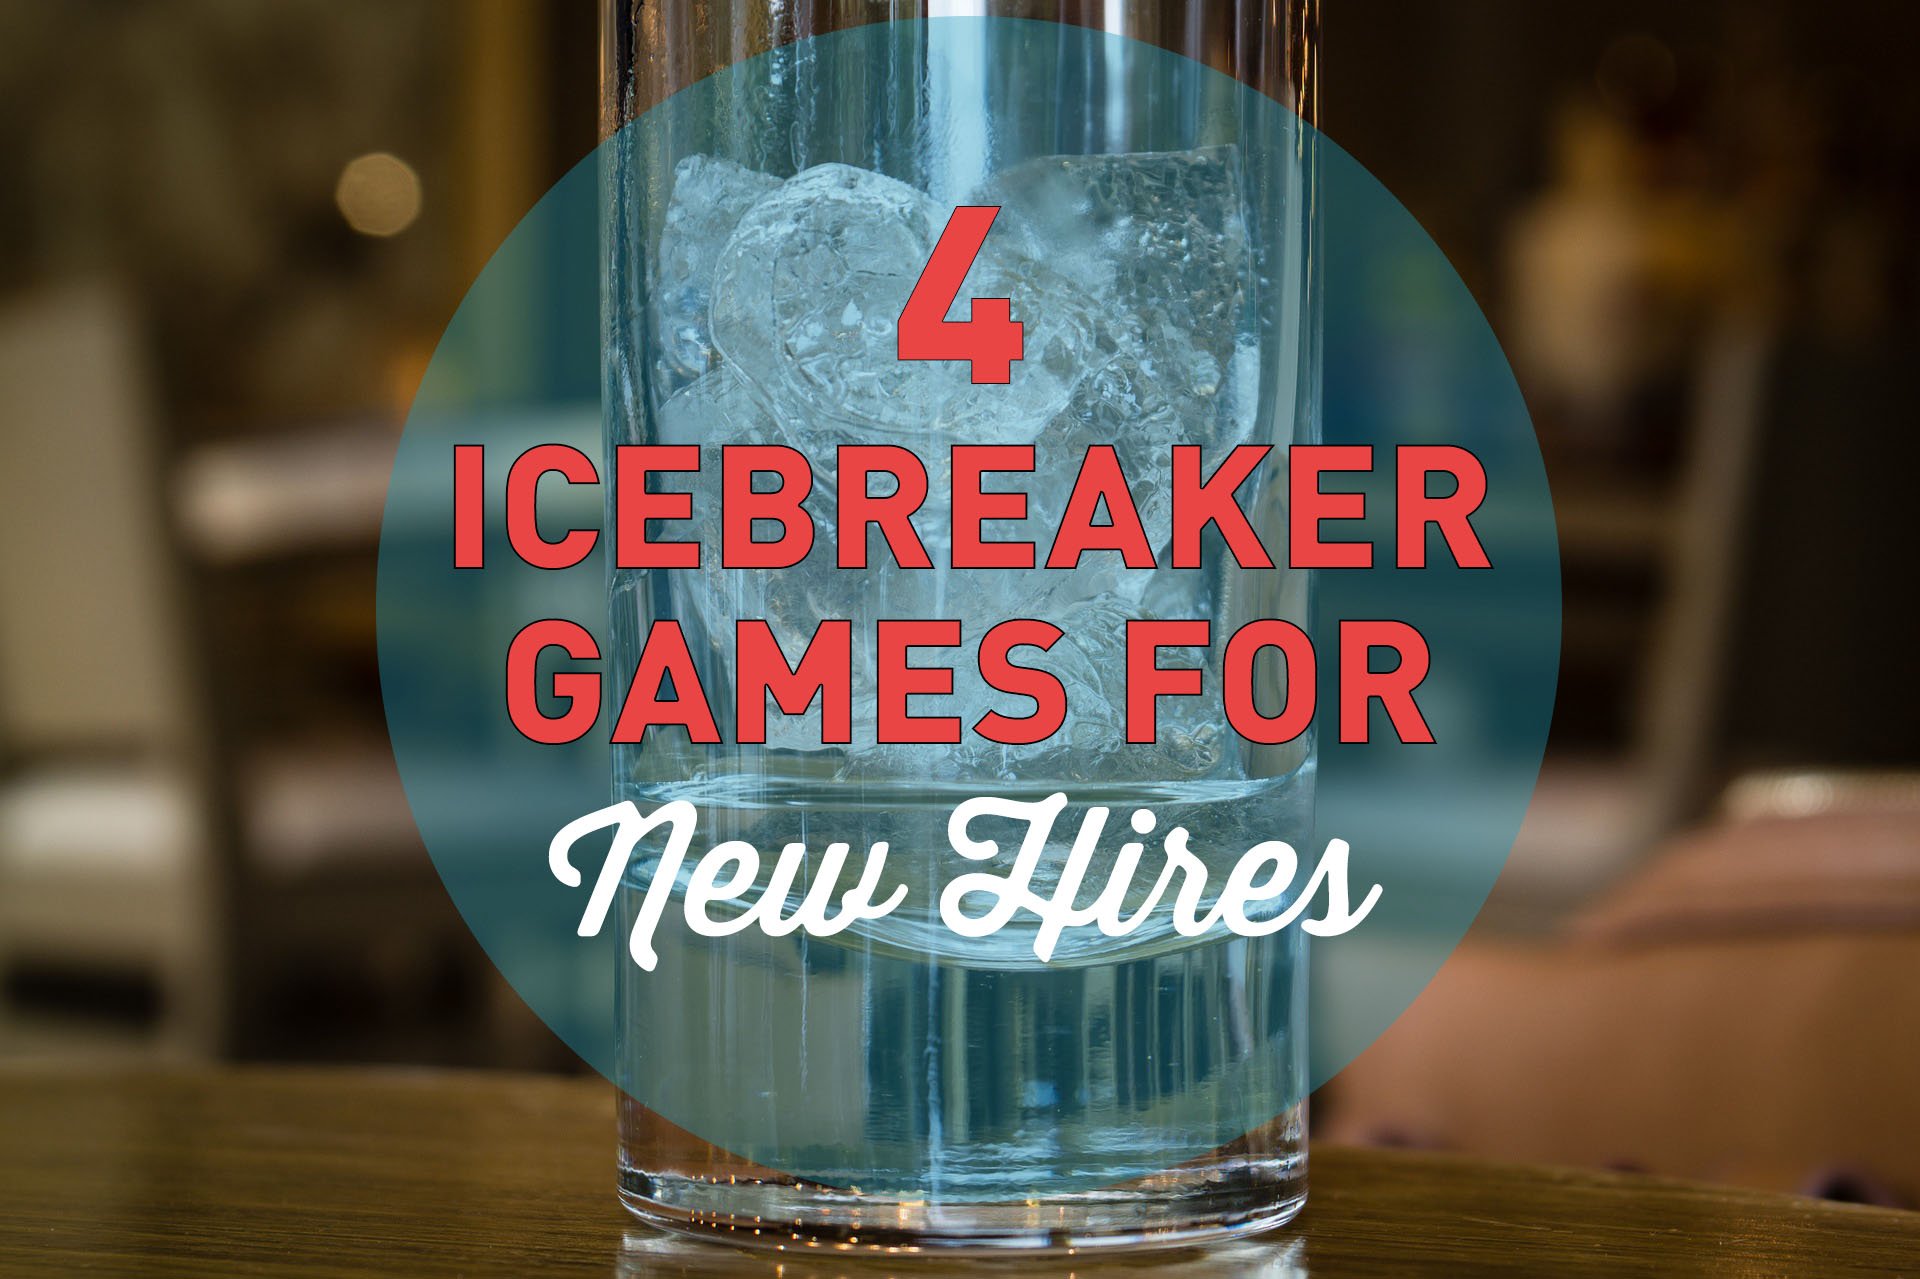 4 Icebreaker Games for new Hires